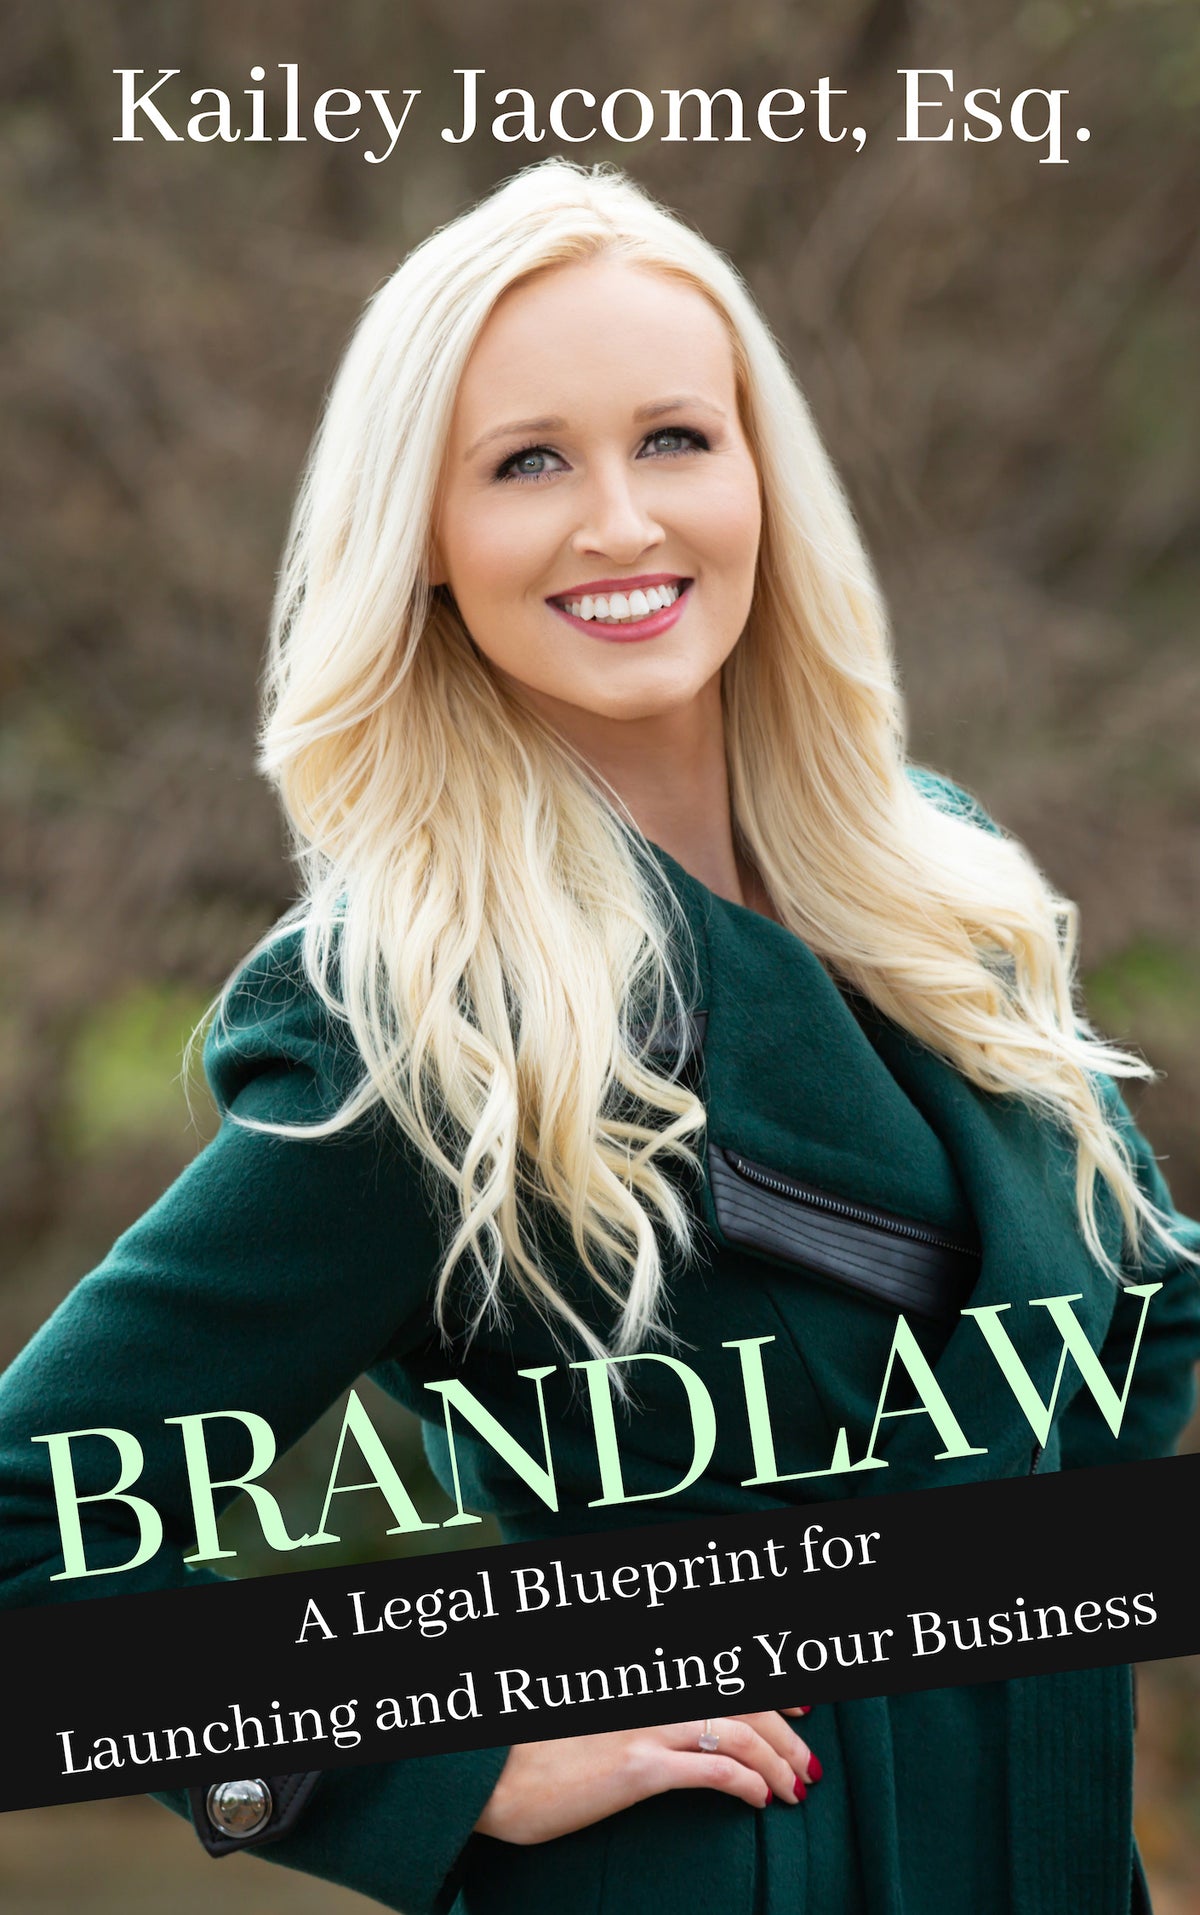 Brandlaw: A Legal Blueprint for Launching and Running Your Business [EBook]